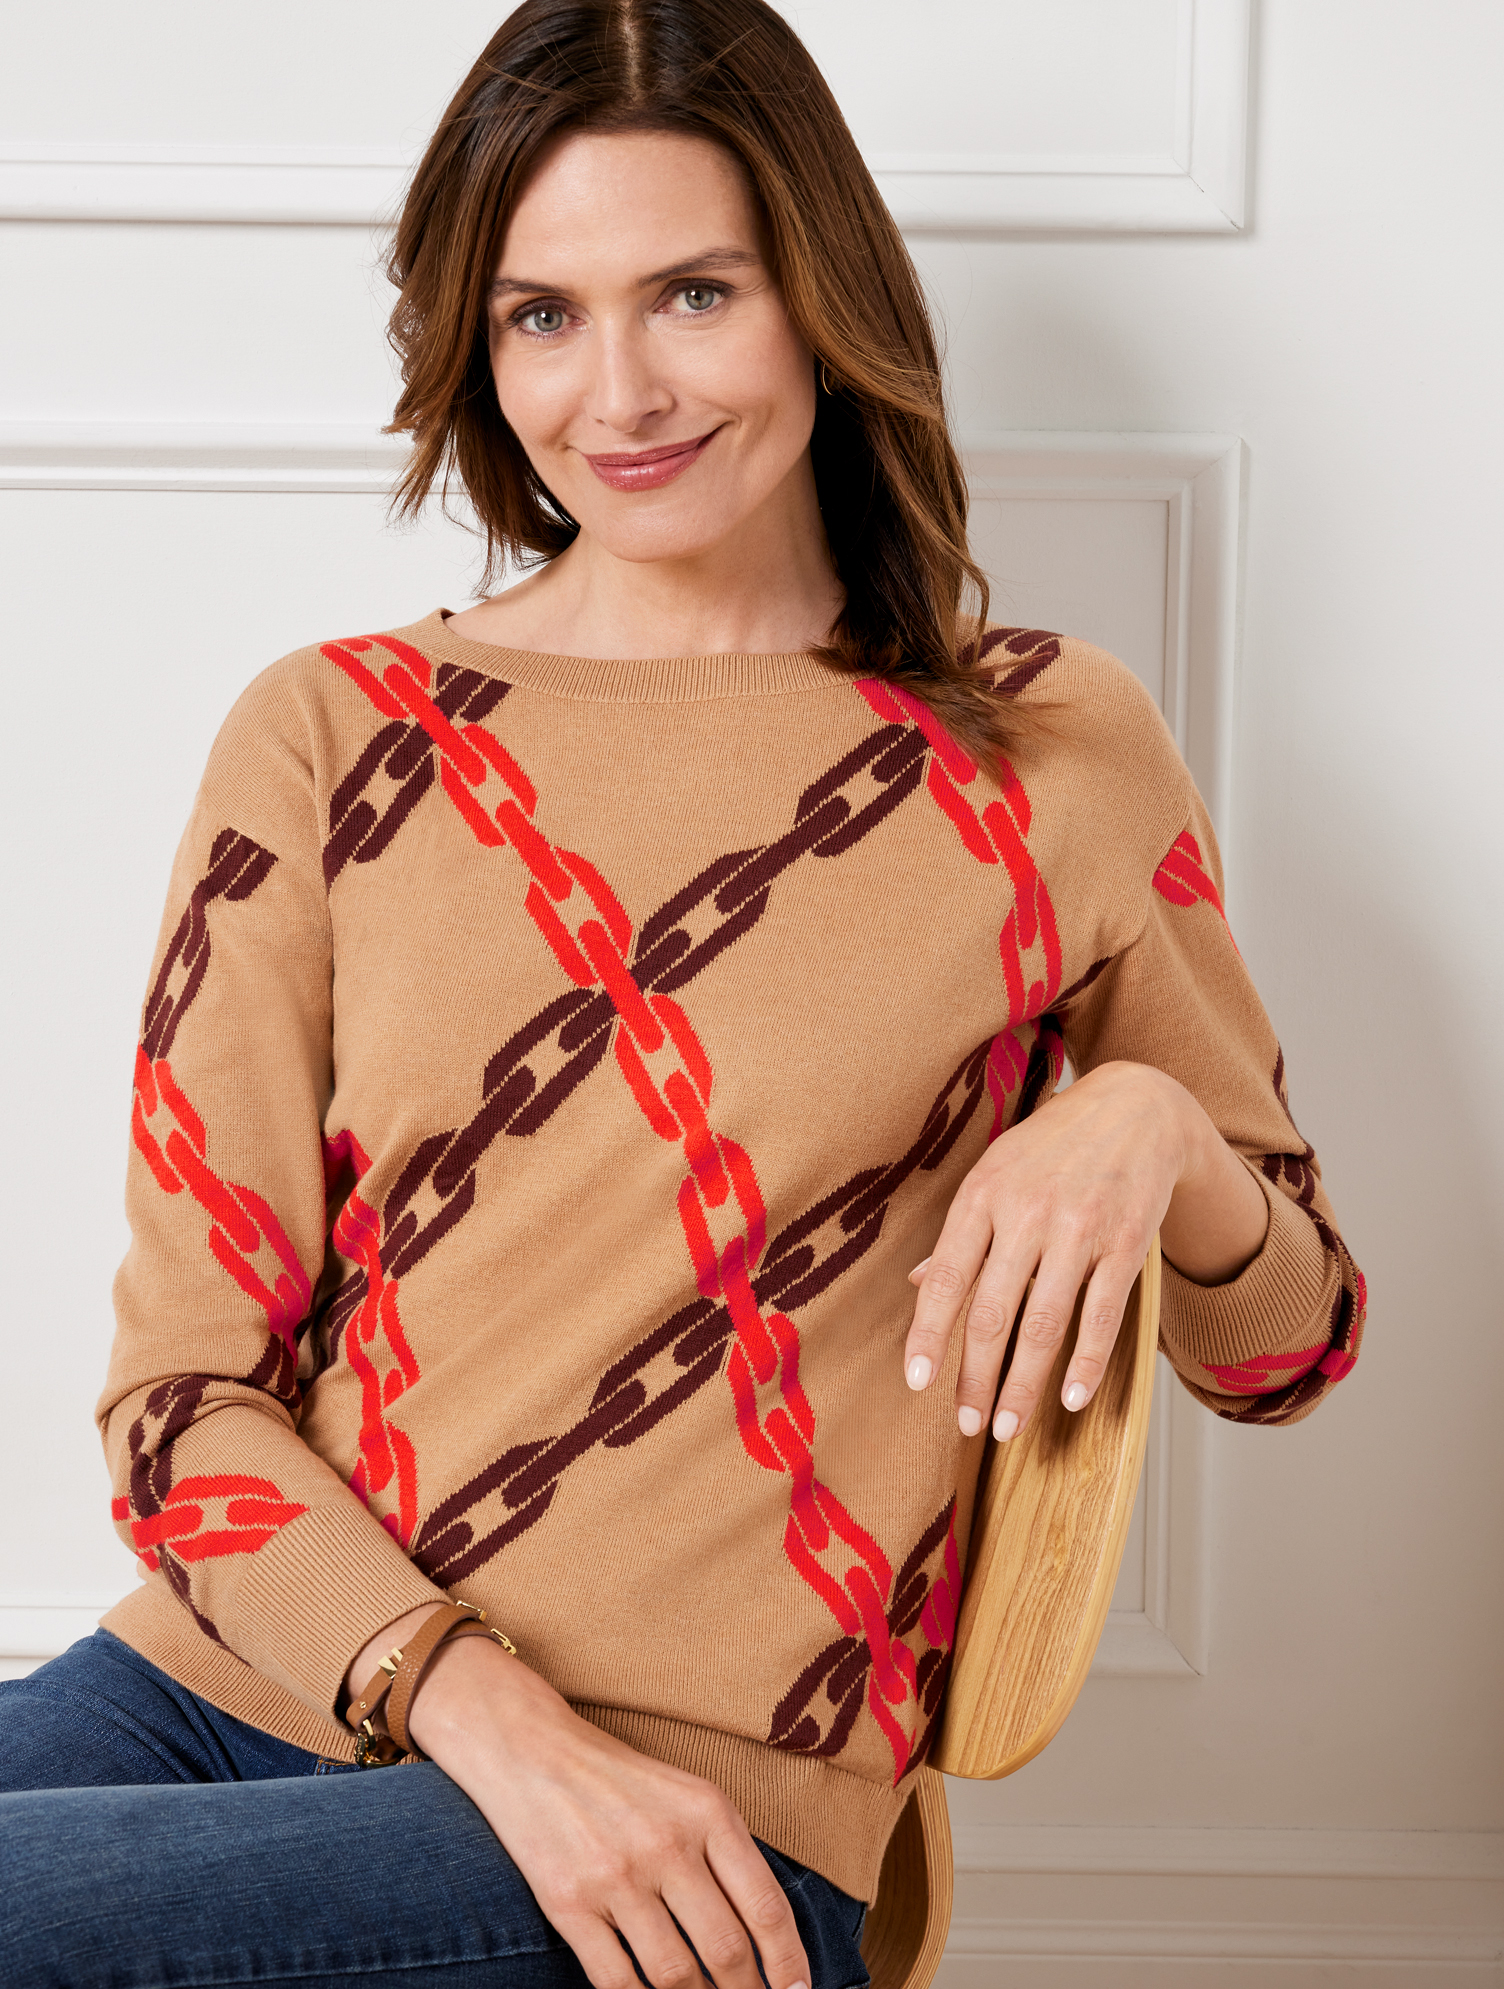 Talbots Plus Size - Boatneck Pullover Sweater - Jacquard Chains - Camel Heather - 3x